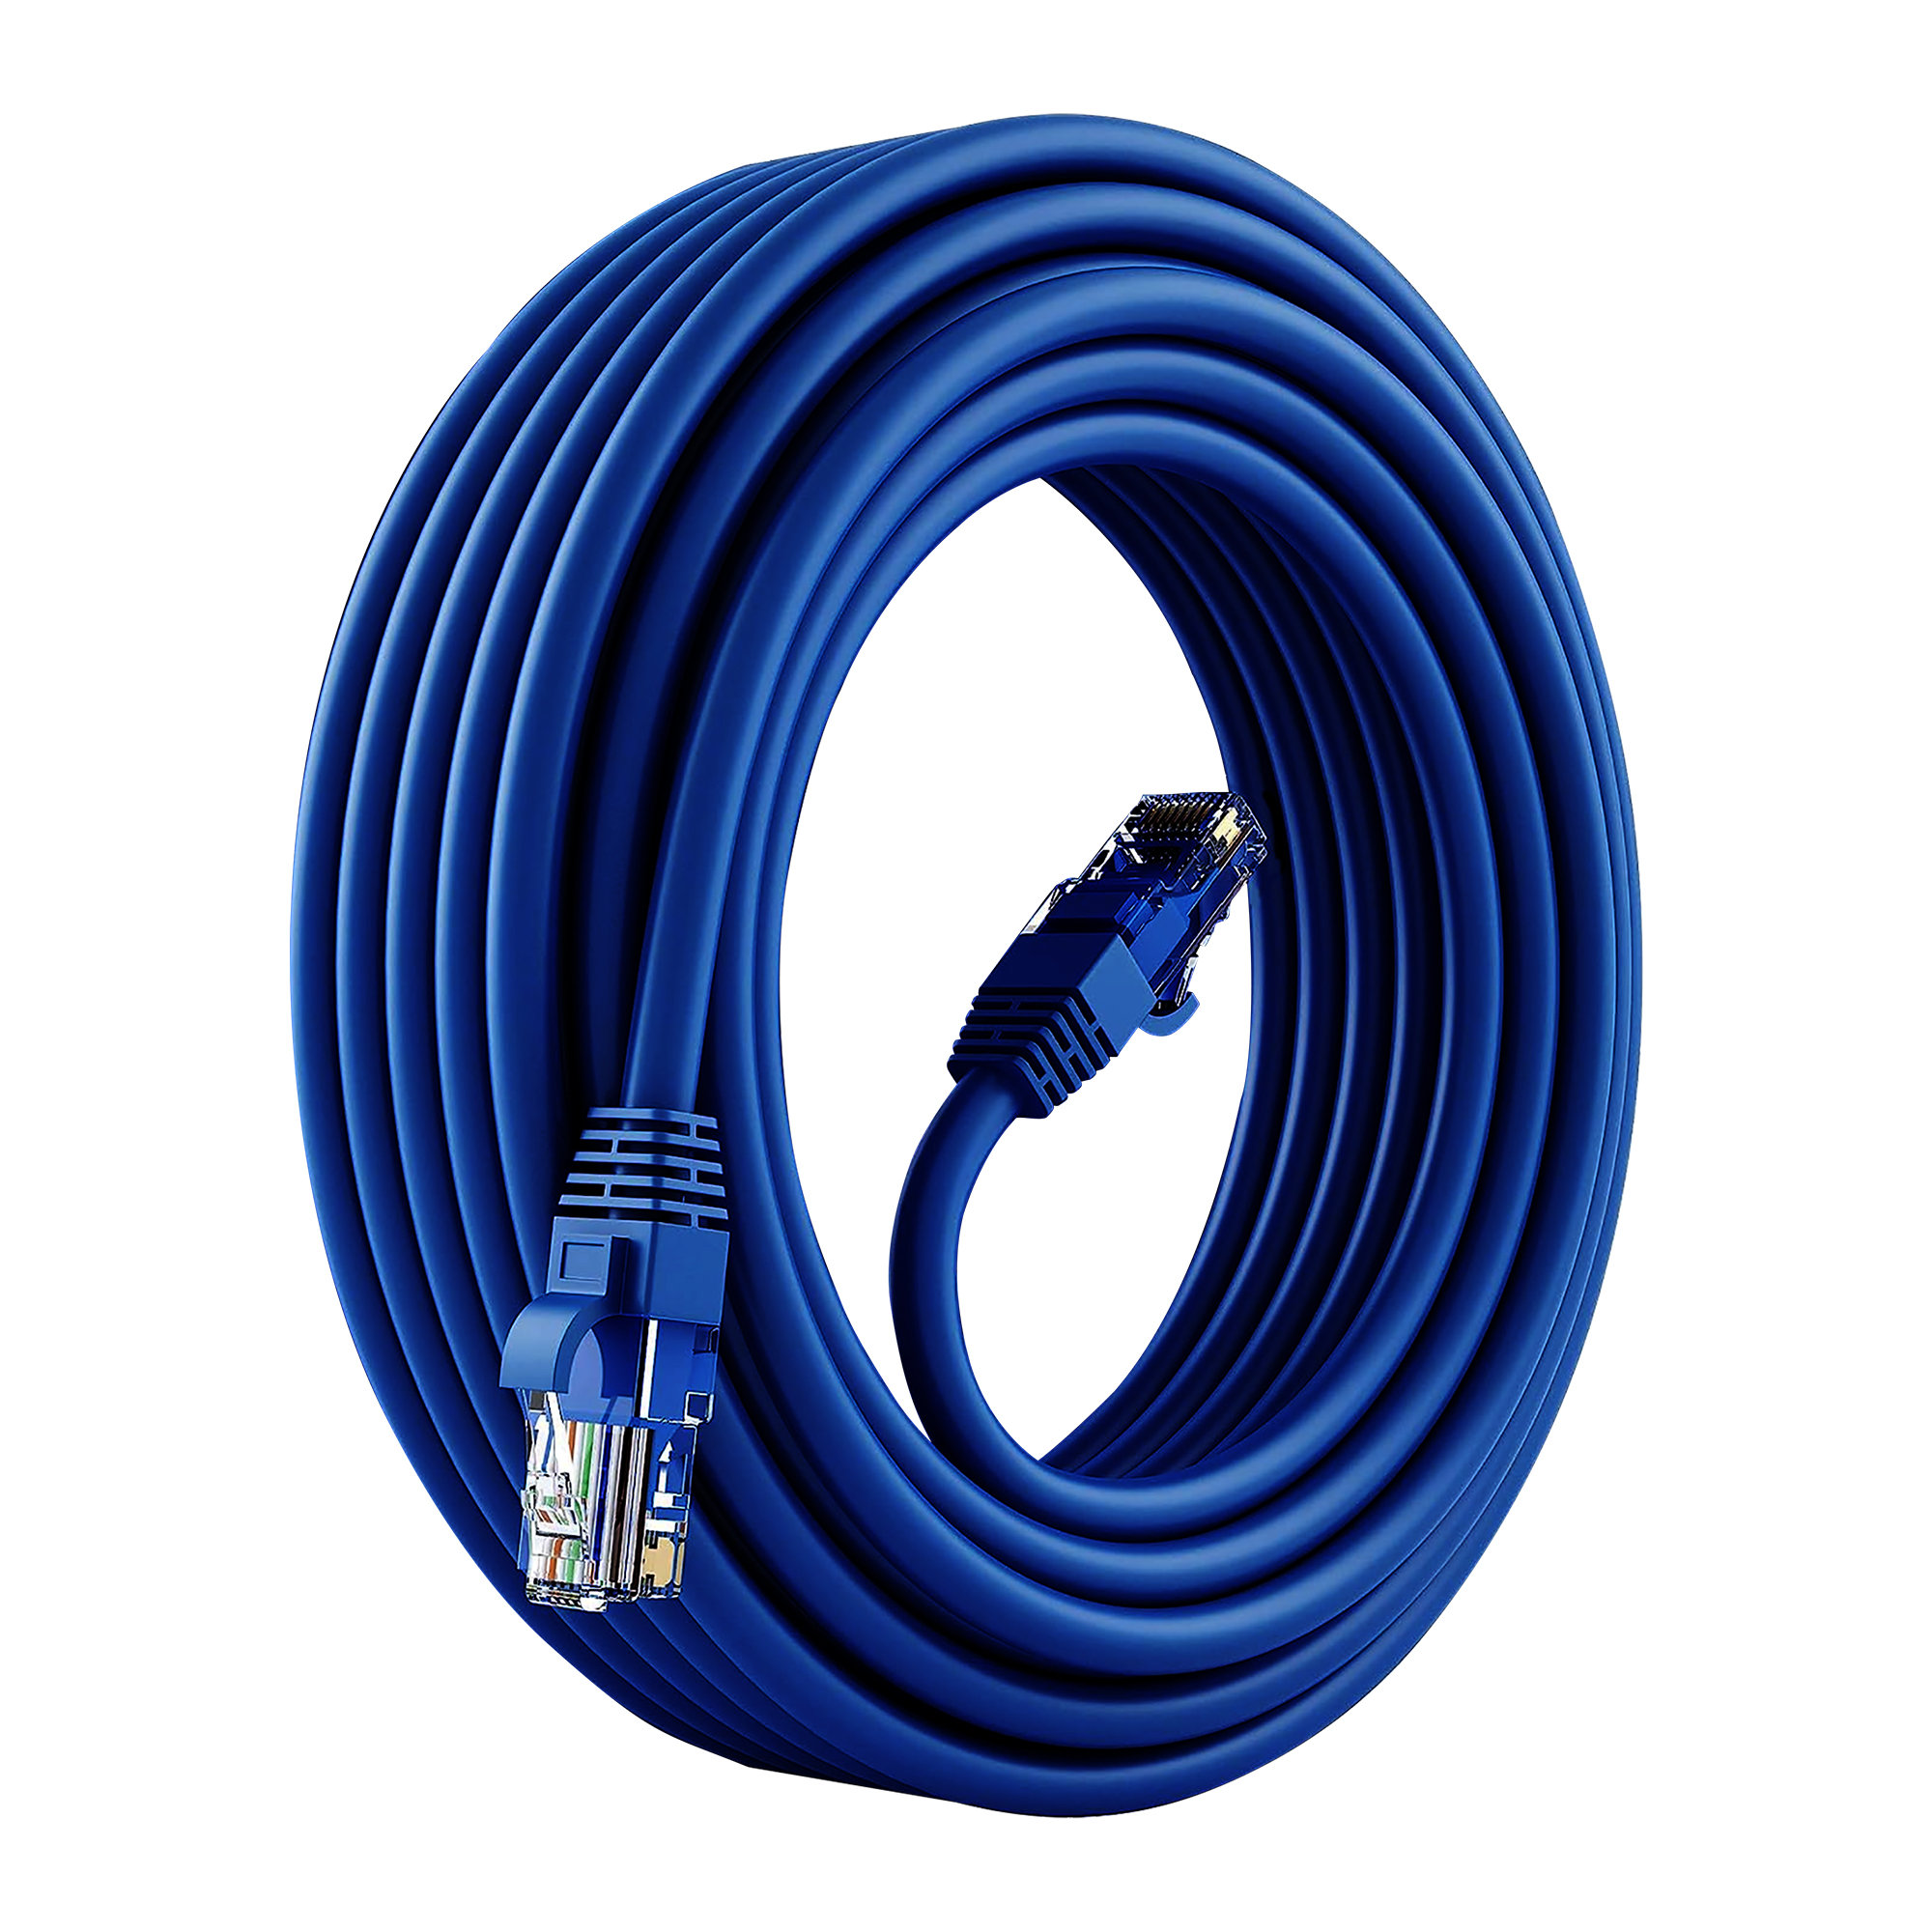 Buy MVTECH Ethernet Cable,13.5 Meter High Speed Cat6 LAN Cable